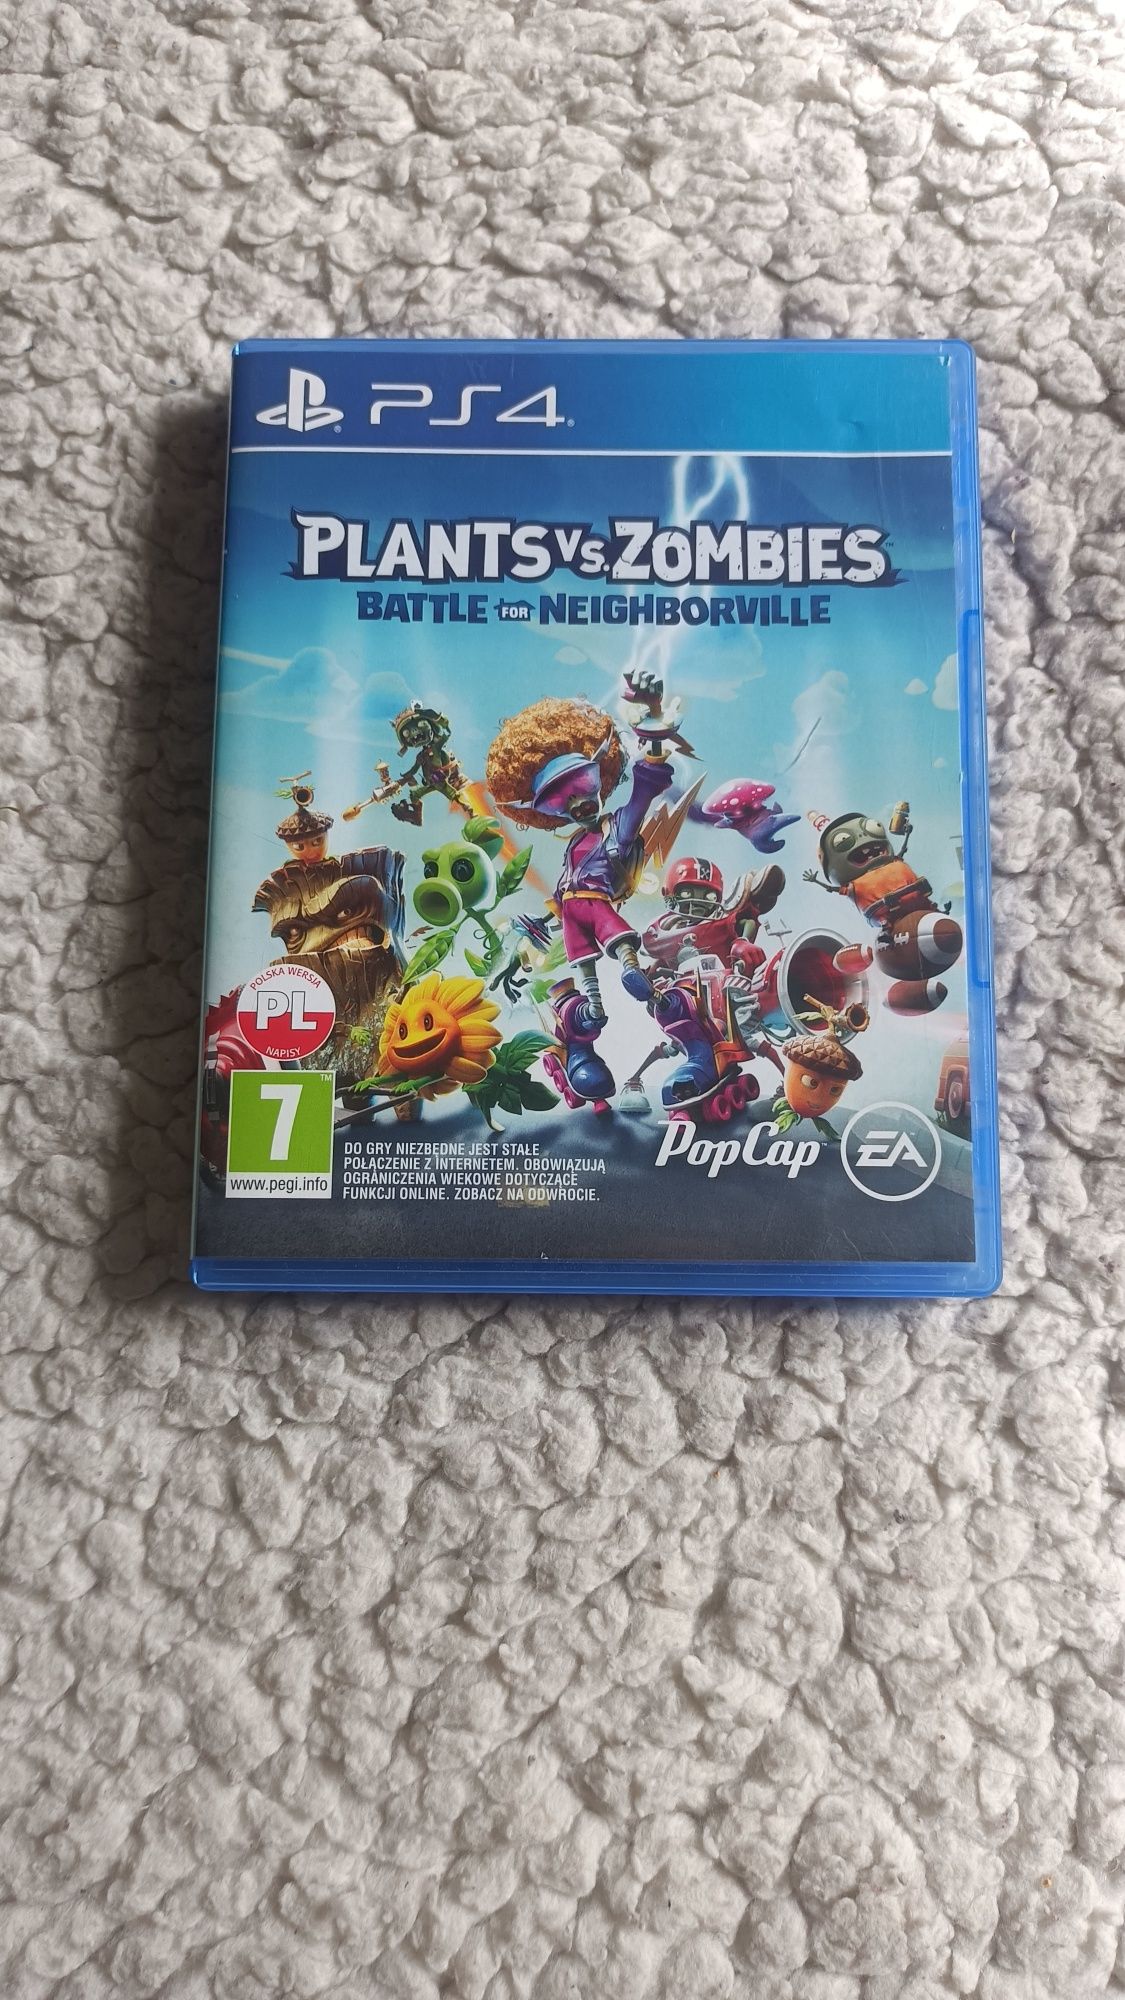 Planets vs Zombies gra na PS4 Pl wersja